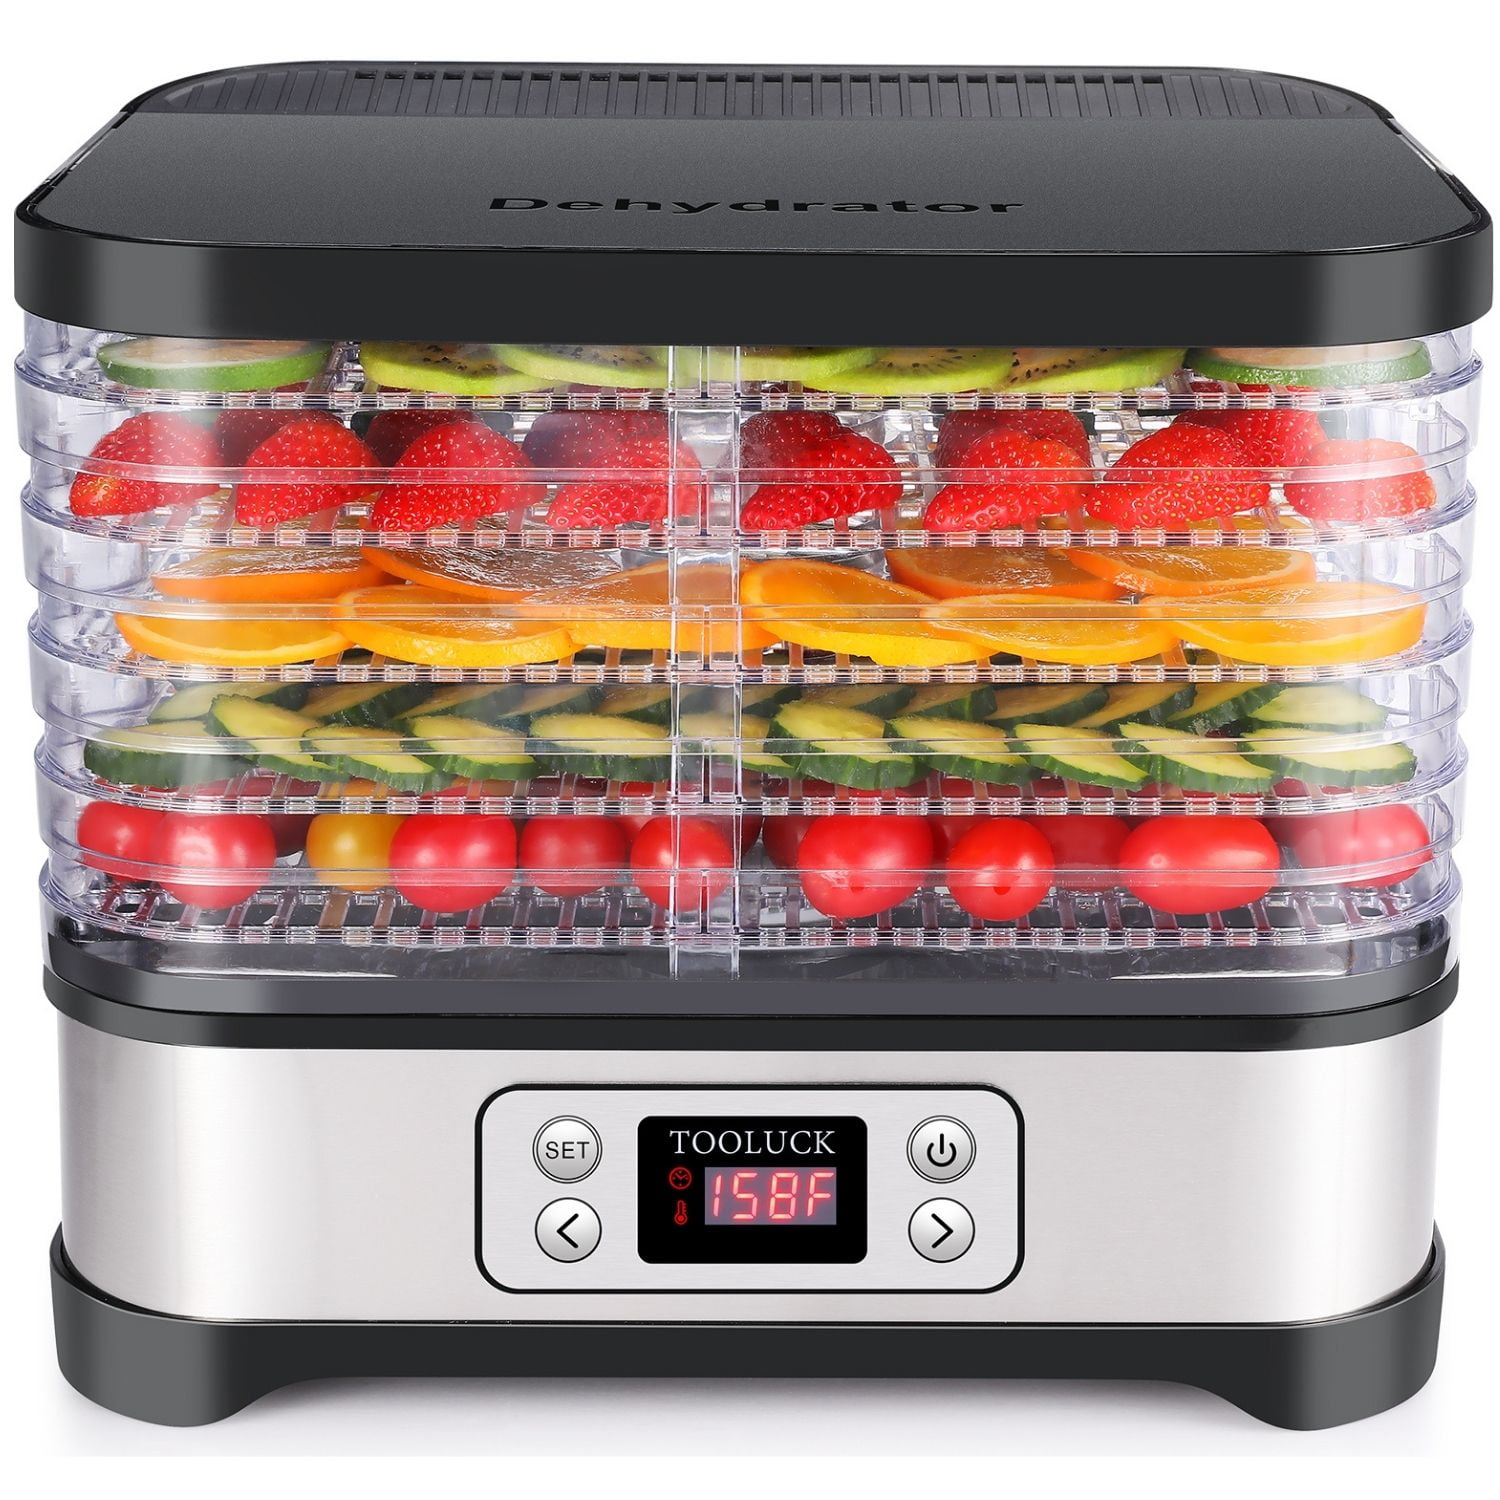 Details about   5 8 Trays Electric Food Dehydrator Machine Home Fruit Jerky Beef Meat Dryer e 71 